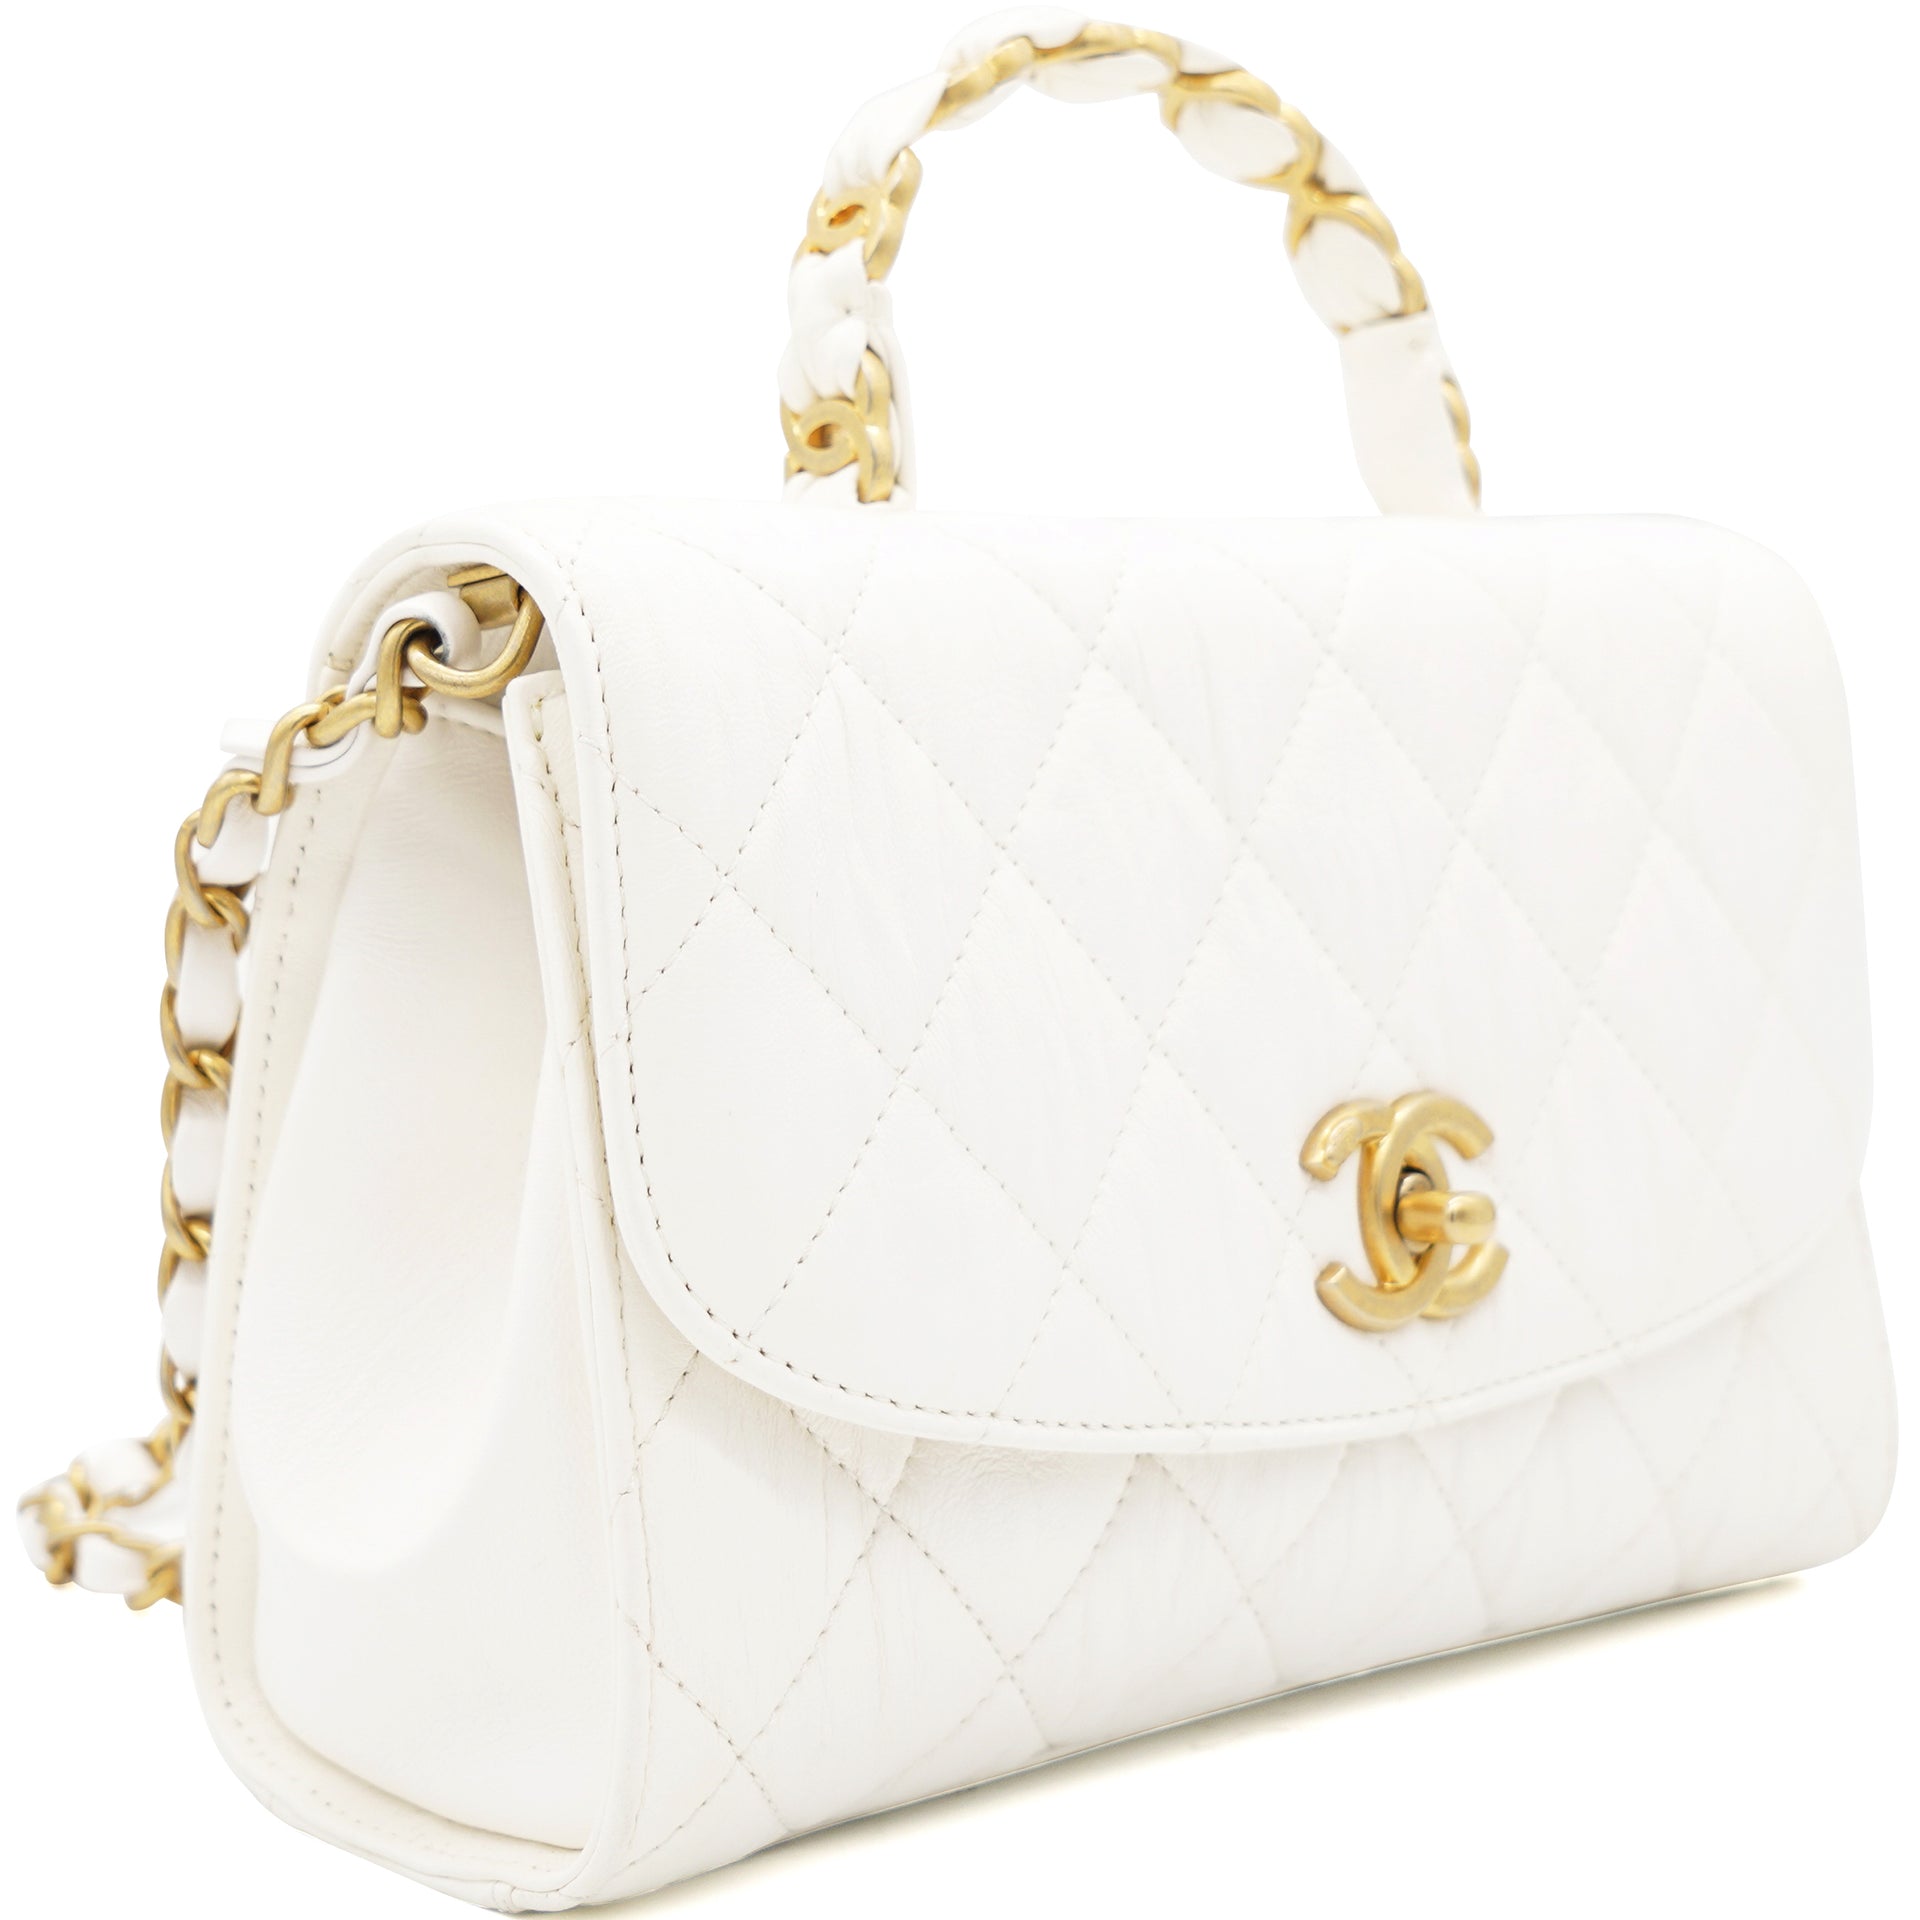 Chanel Mini Flap Bag with Top Handle Pink Crumpled Lambskin Aged